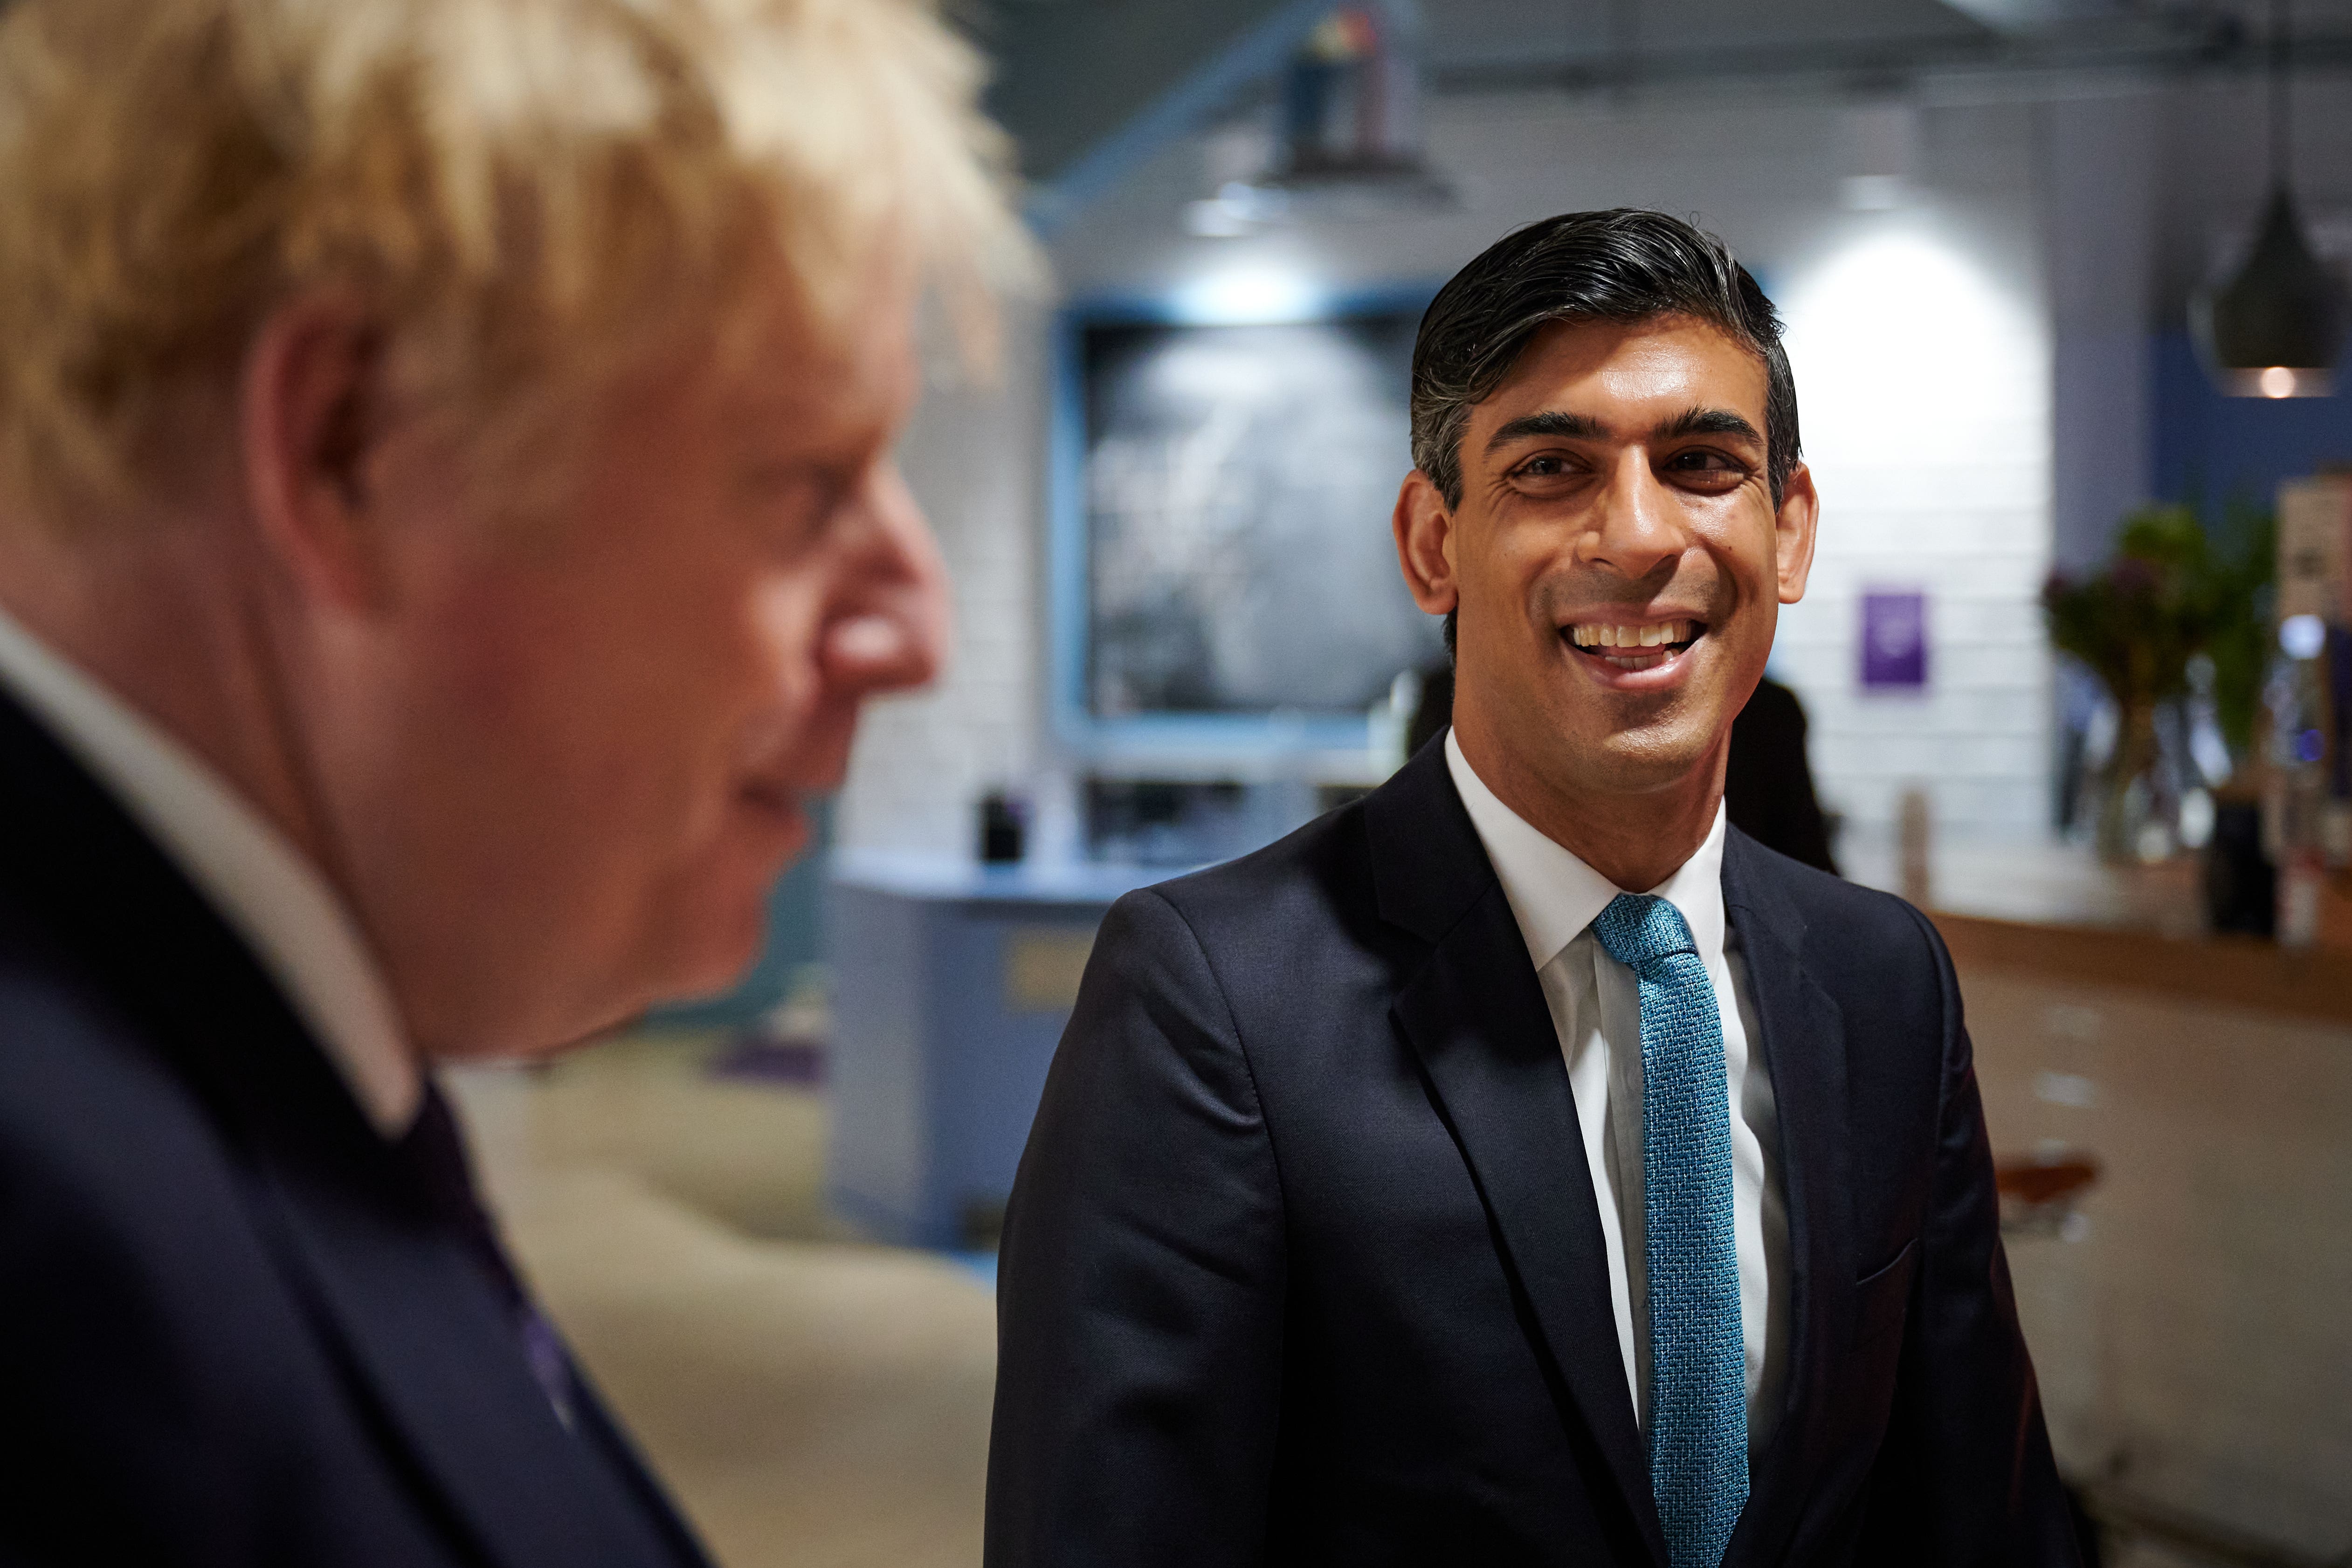 Johnson’s latest woes are also bad news for Rishi Sunak